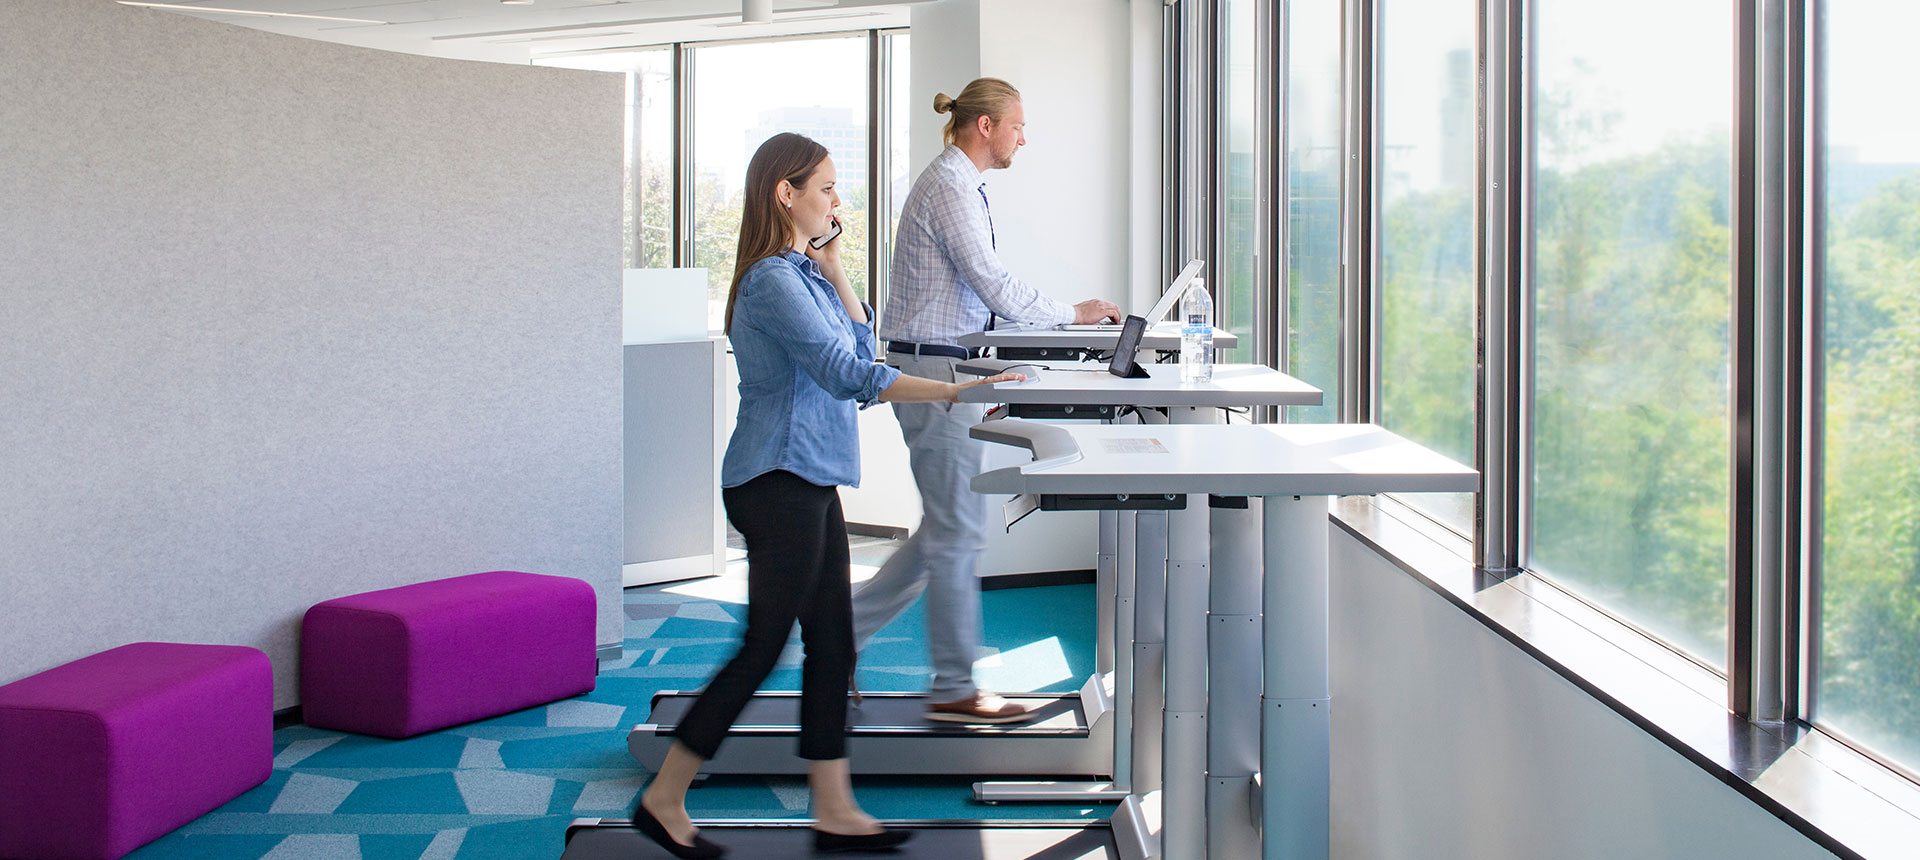 wellness activities for the workplace